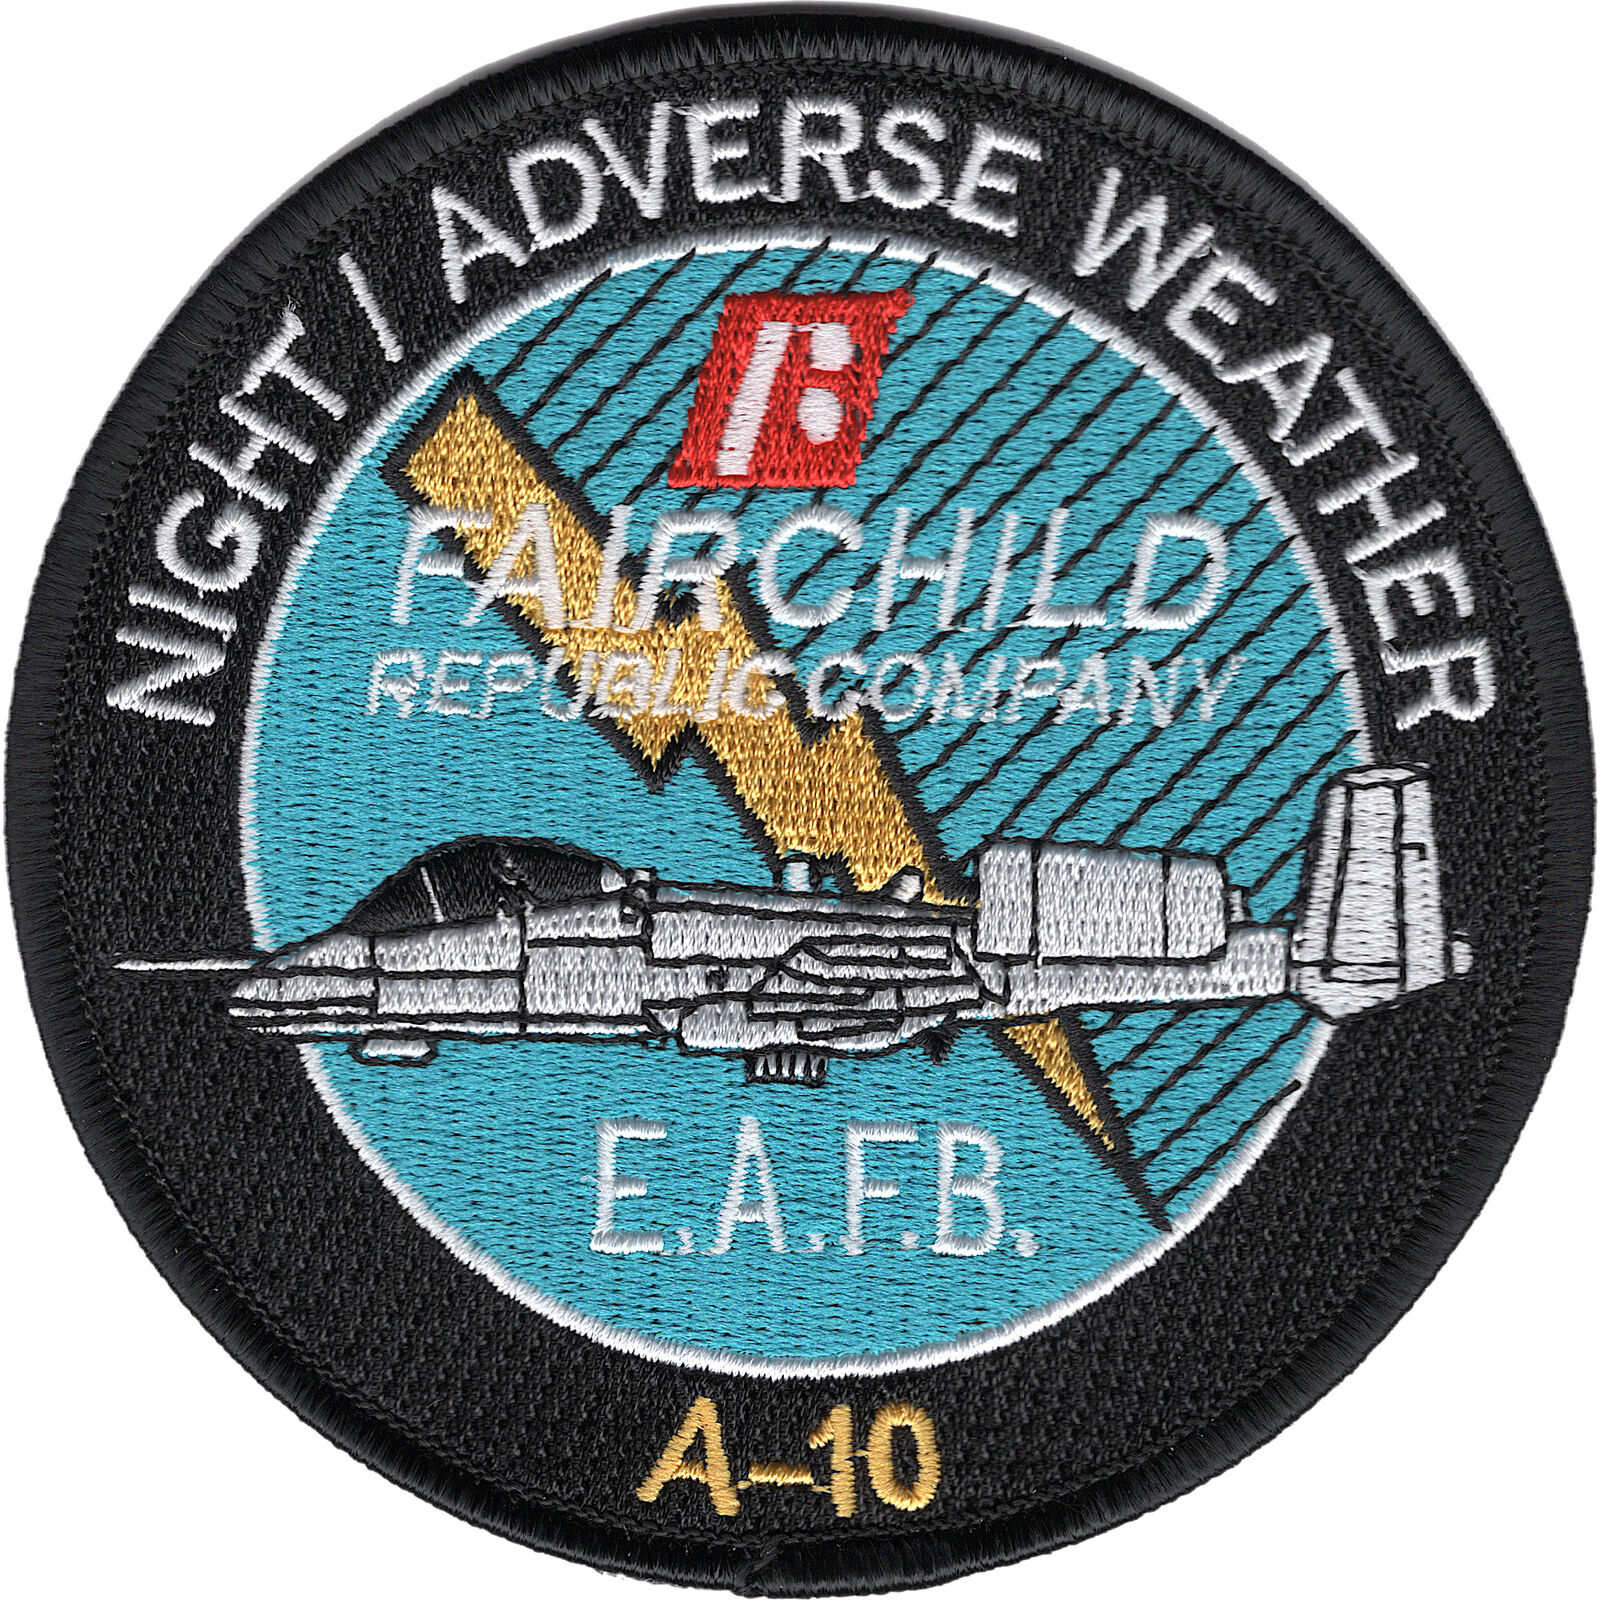 A-10 Night Adverse Weather By Fairchild Republic Company Patch EAFB